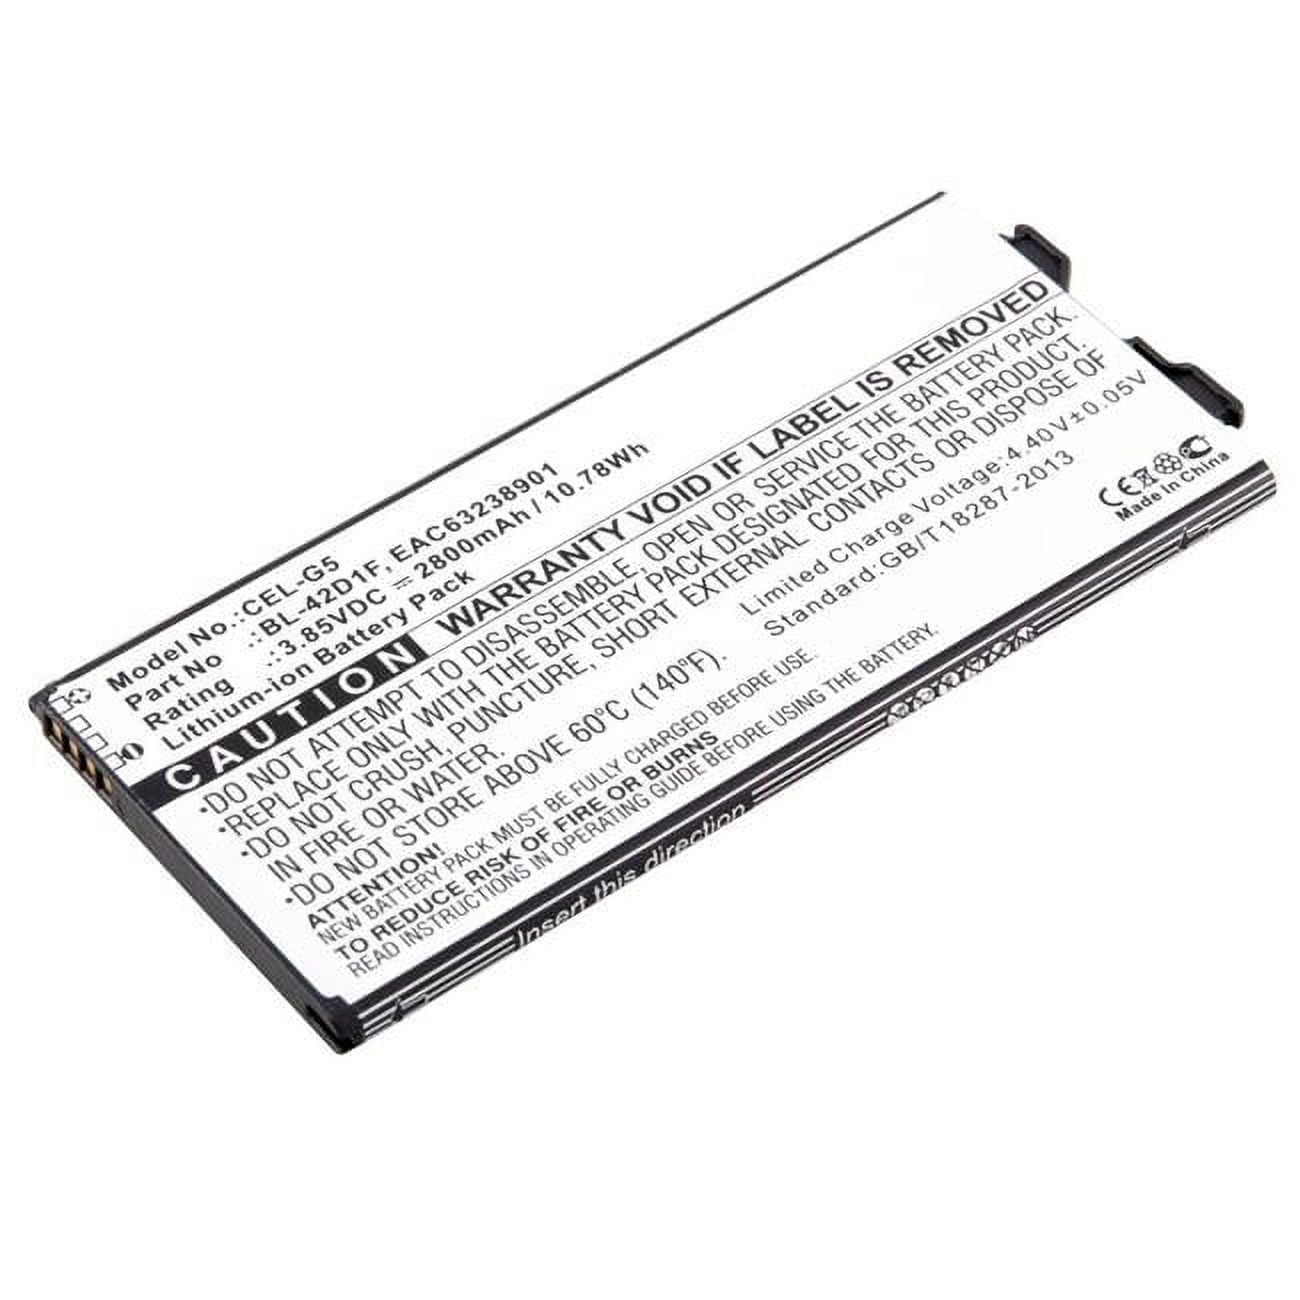 Picture of Ultralast CEL-G5 3.8V & 2800 mAh Li-ion Cell Phone Battery for LG-BL-42D1F&#44; LG-EAC63238801&#44; LG-EAC63238901